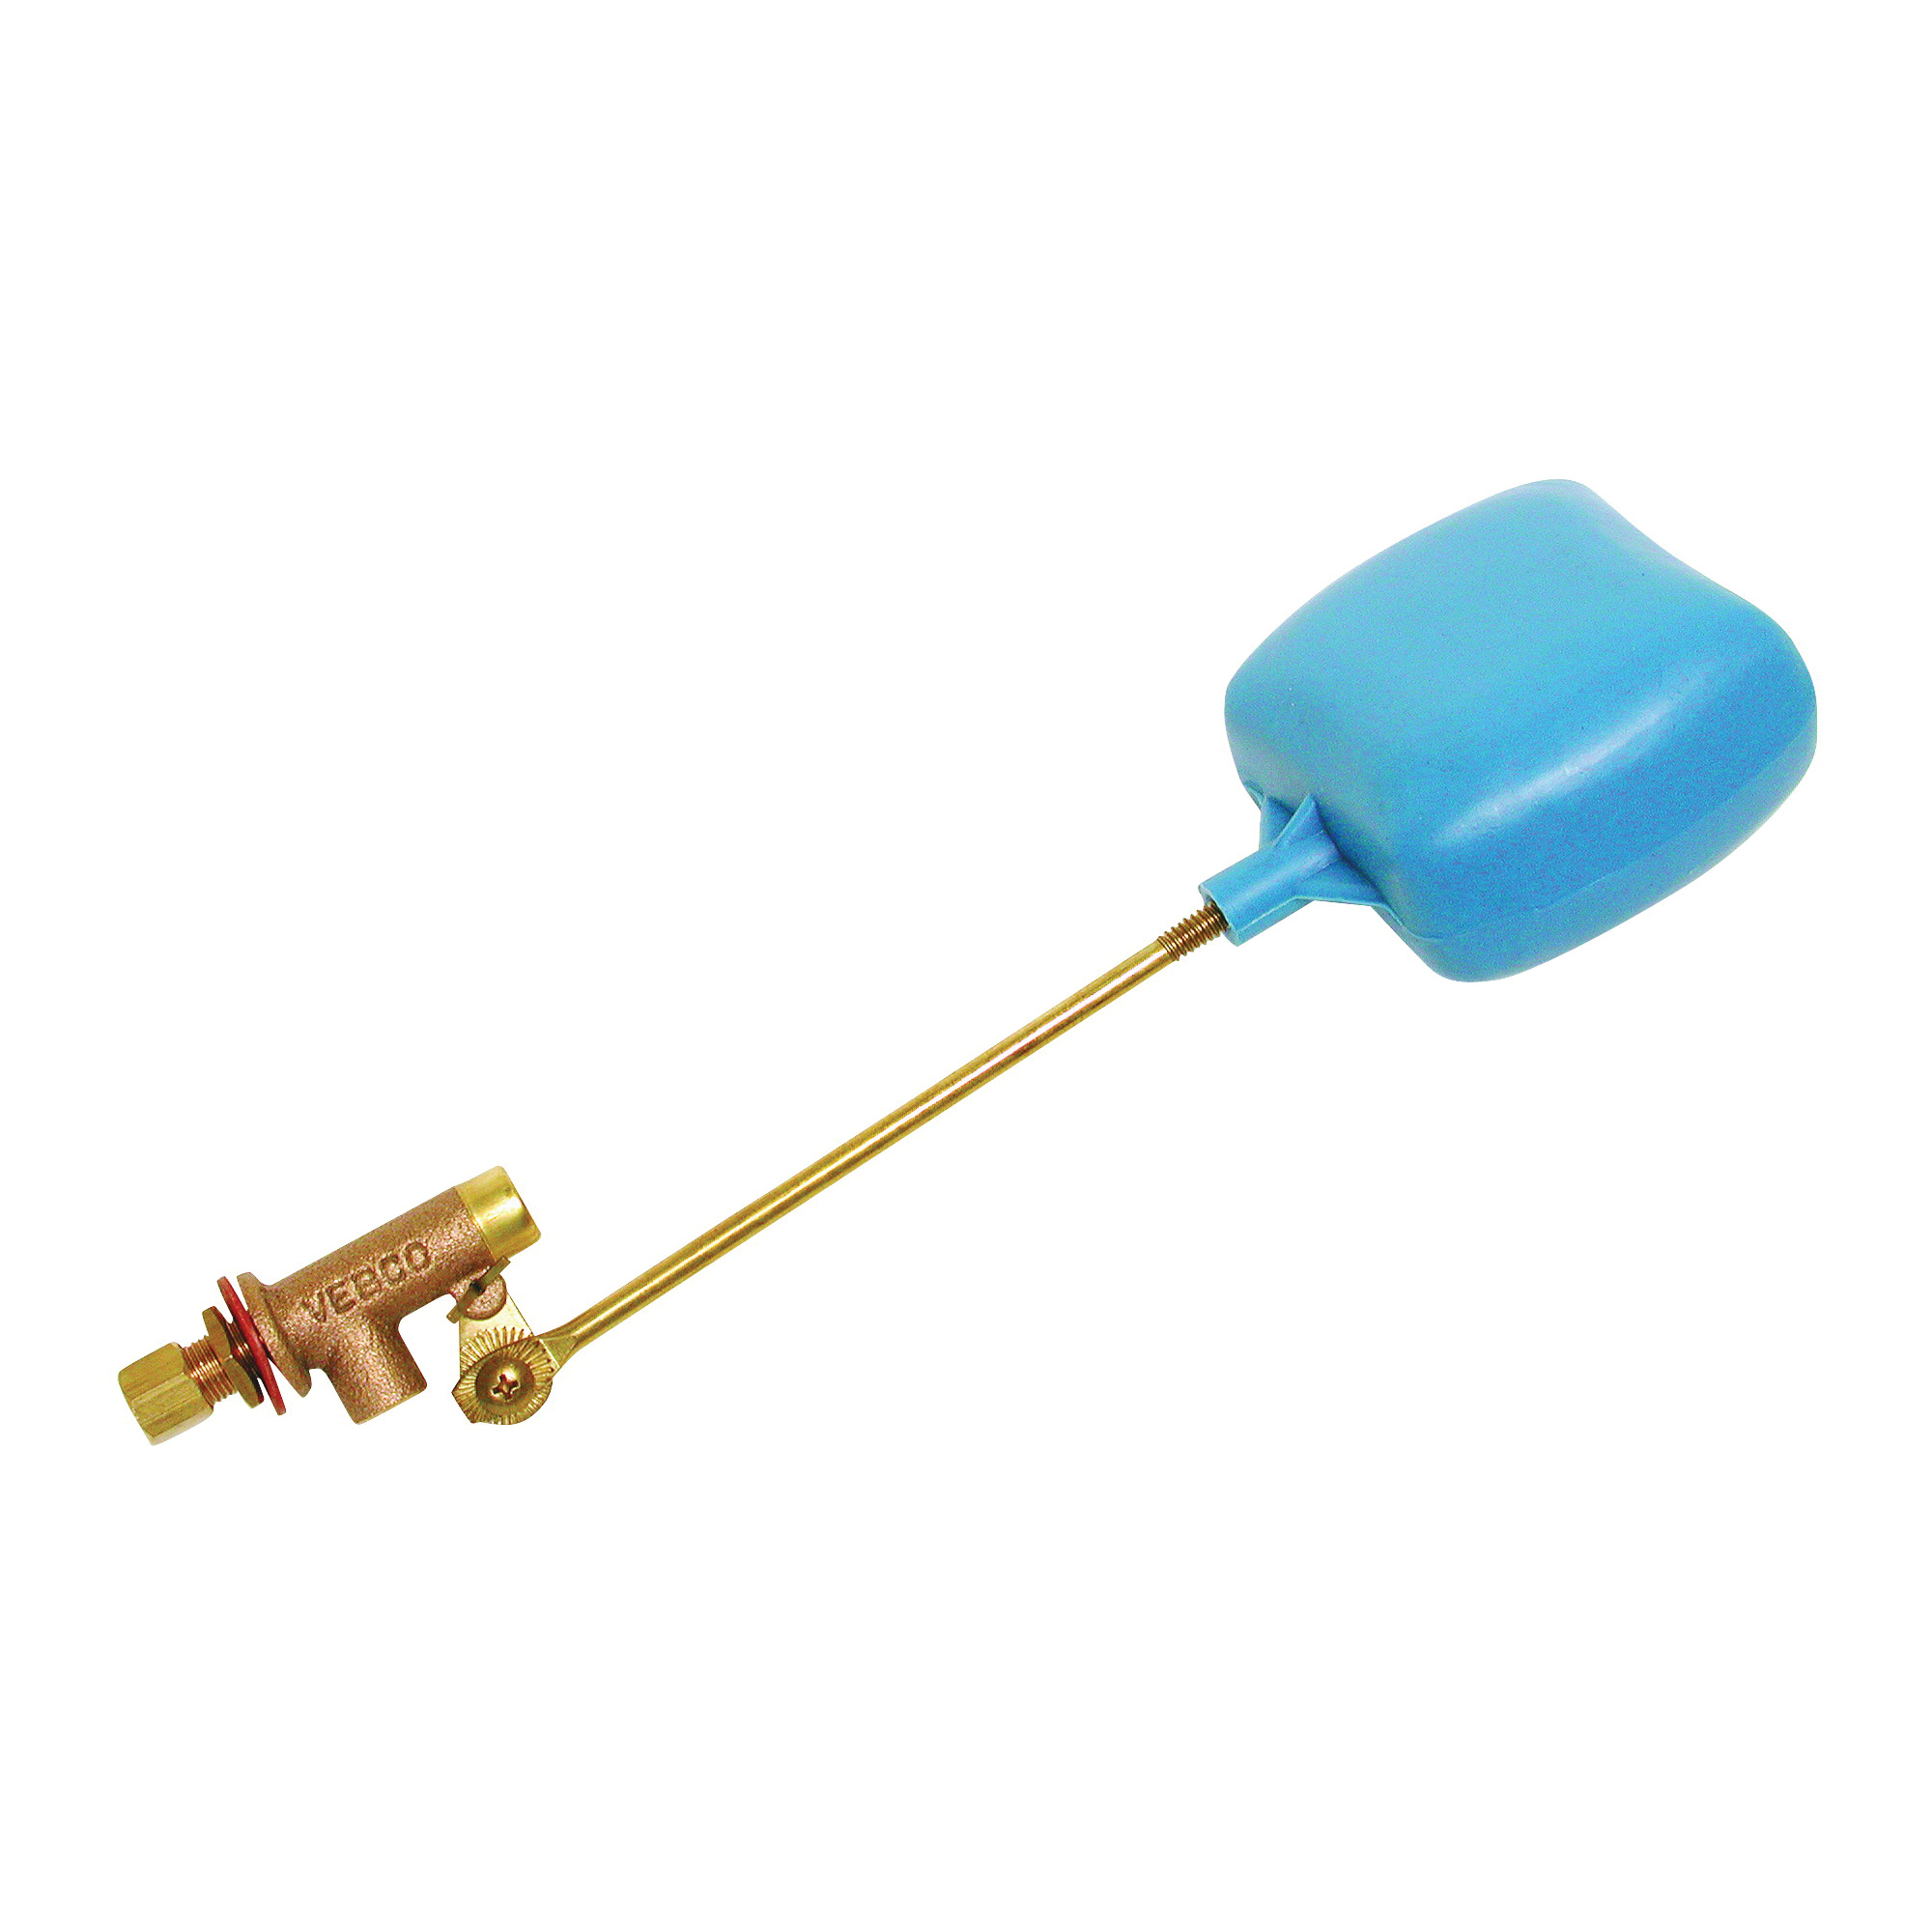 4159 Float Valve, Heavy-Duty, Brass, Green, For: Evaporative Cooler Purge Systems